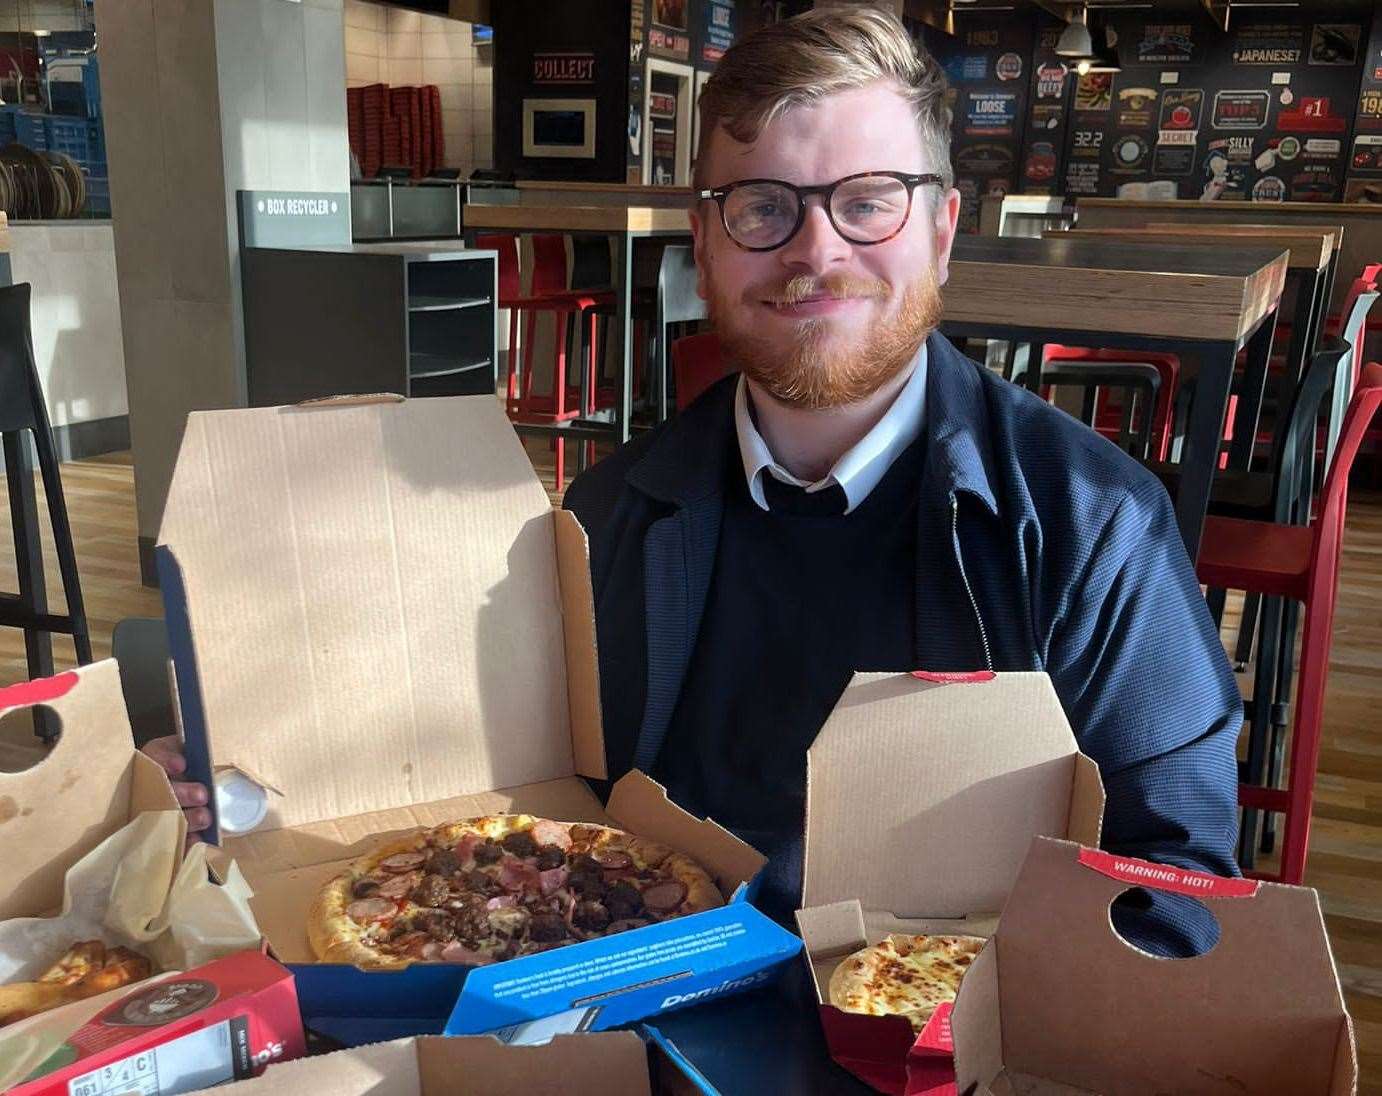 Domino's largest UK dine-in restaurant, in Loose Road, Loose, was bigger than expected